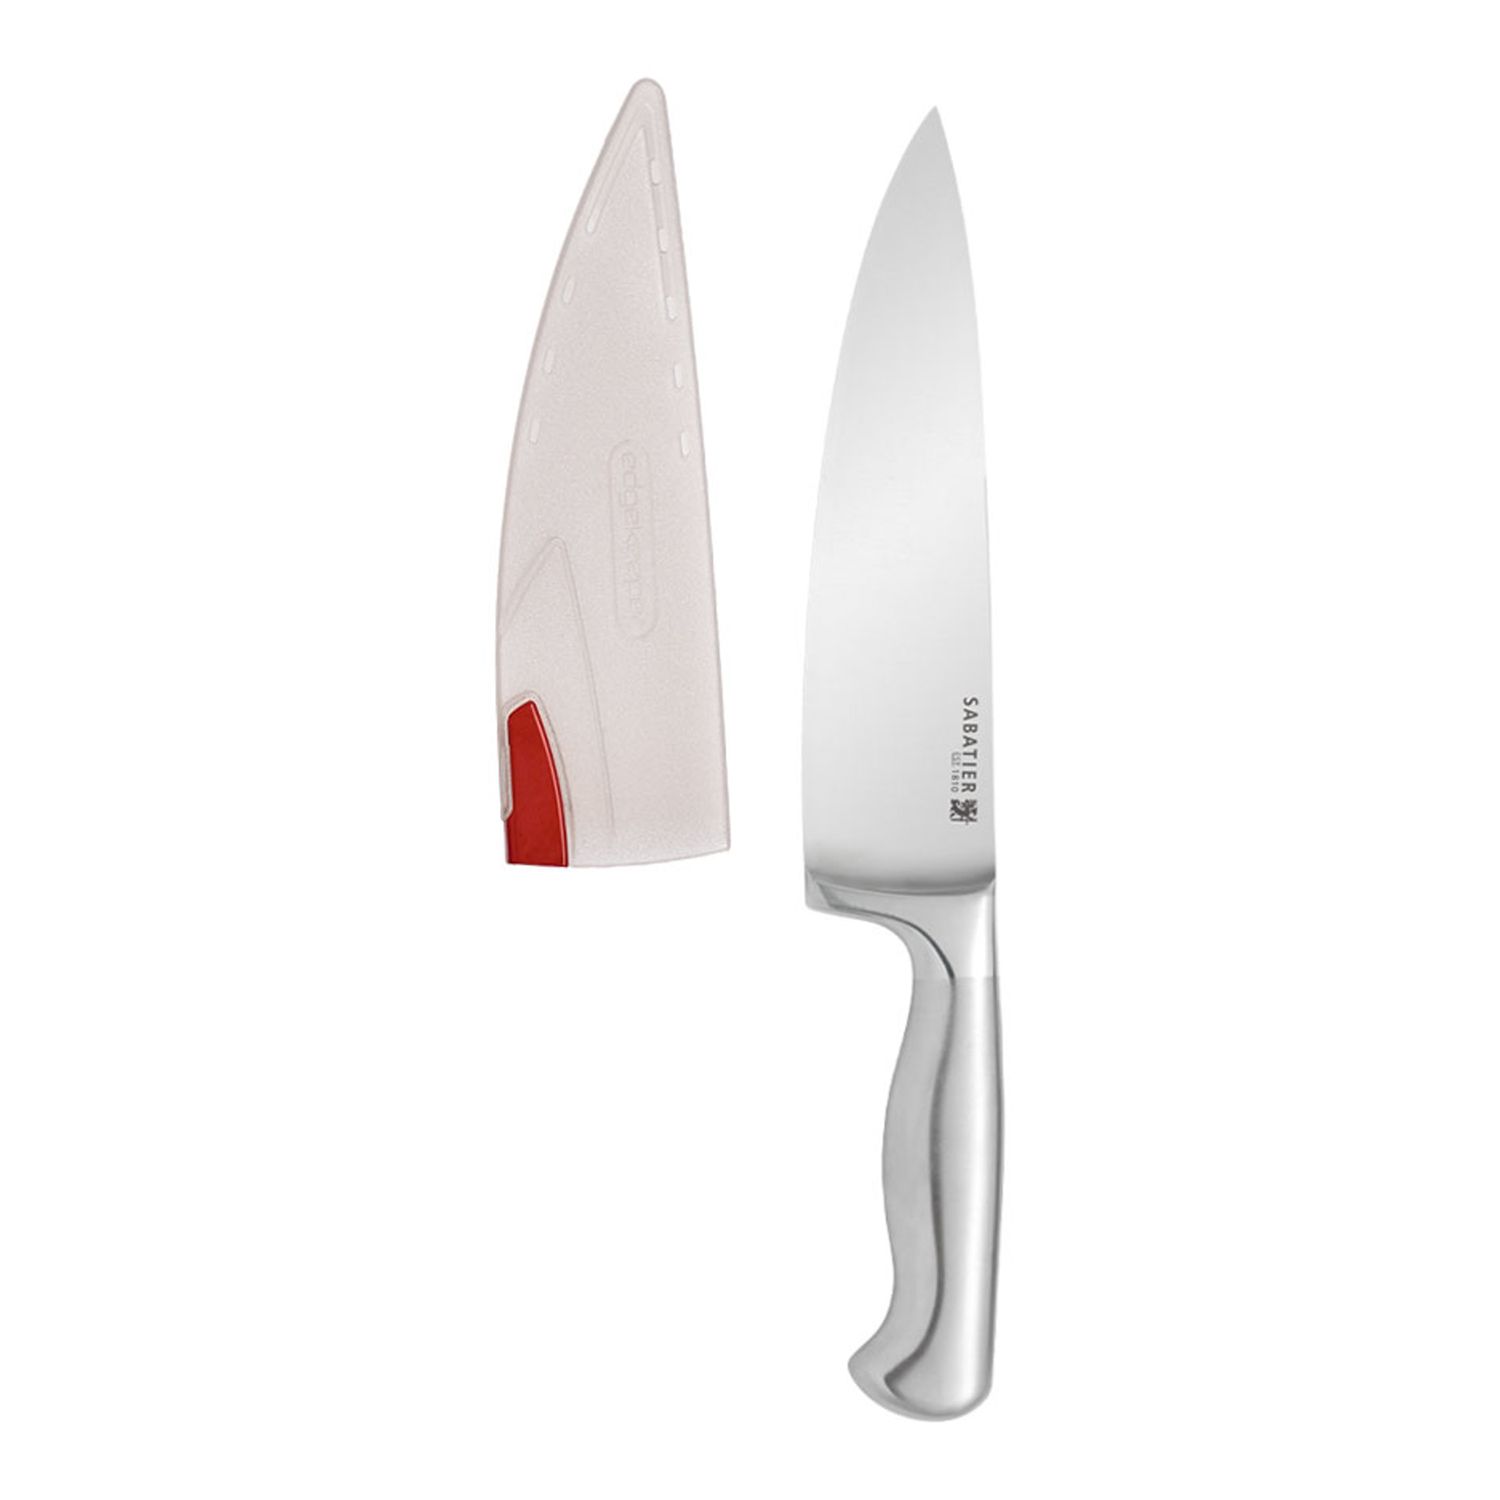 UberSchnitt Professional chef knife with sheath and knife sheaths for  kitchen knives ,2Piece Non-scratch felt-lined for culinary Felt Lining,  non-Toxic and Food Safe - Knives Not Included Set of 2 